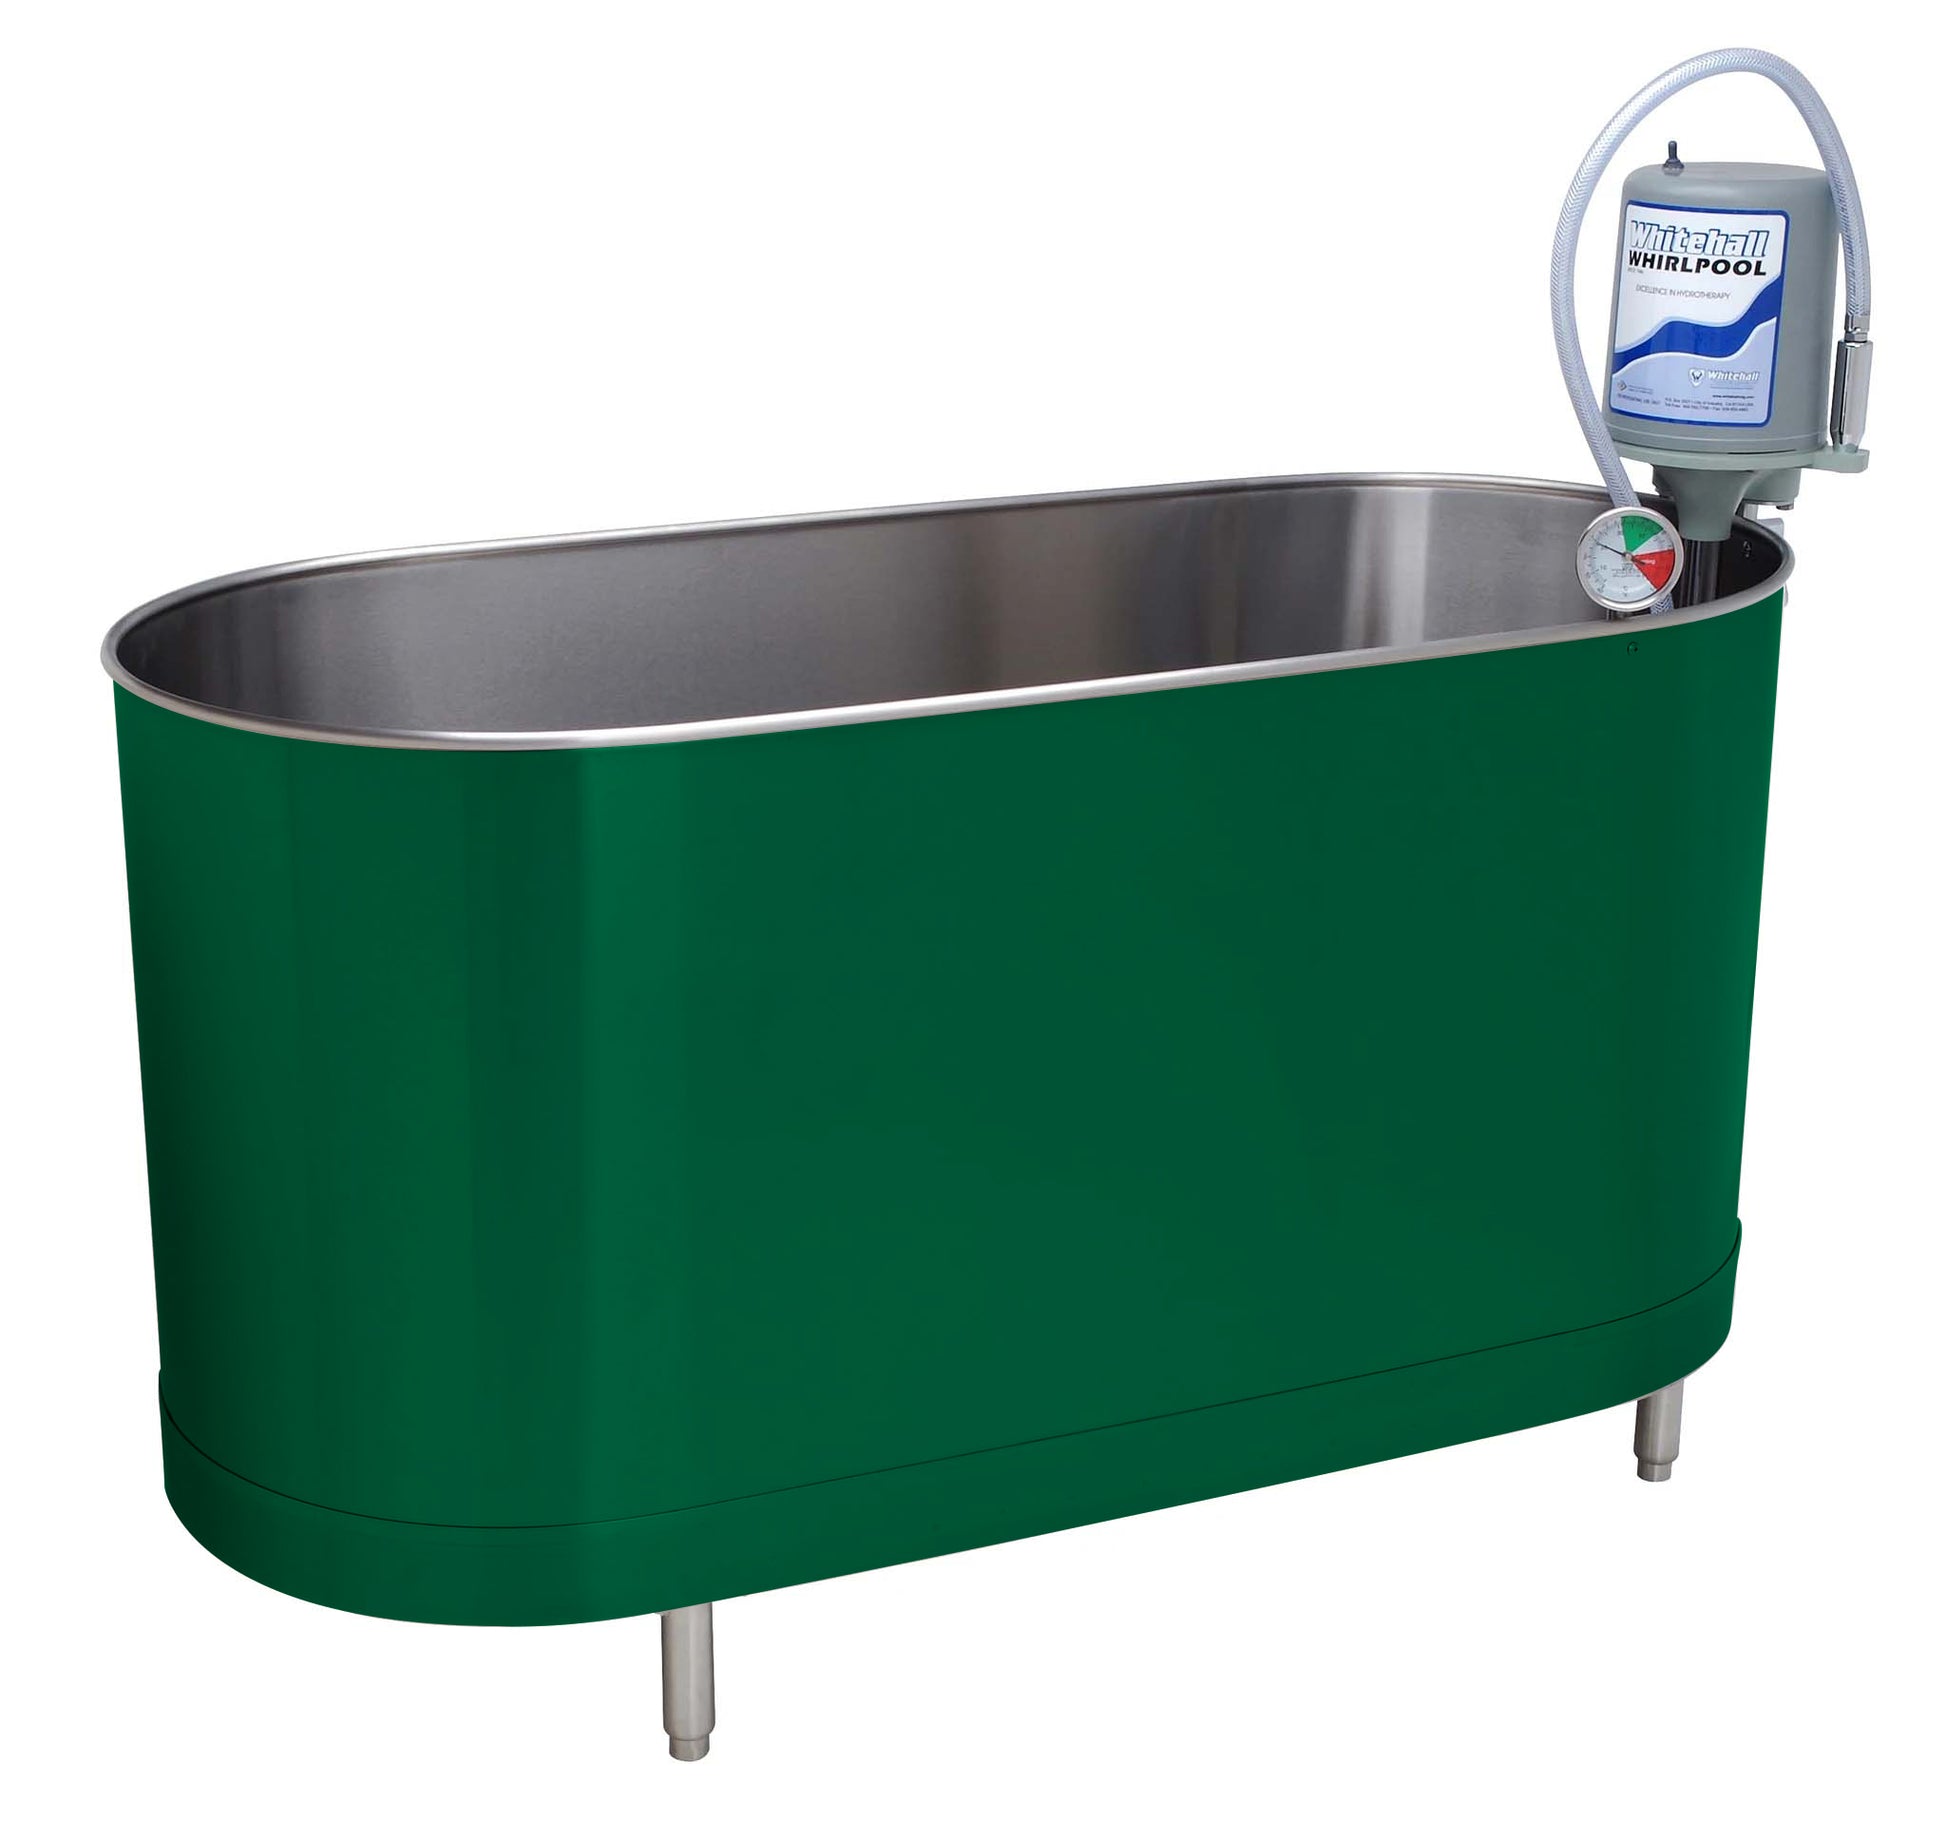 Fairway Green Whitehall S-85-SL 85 Gallons Stationary Whirlpool with Legs